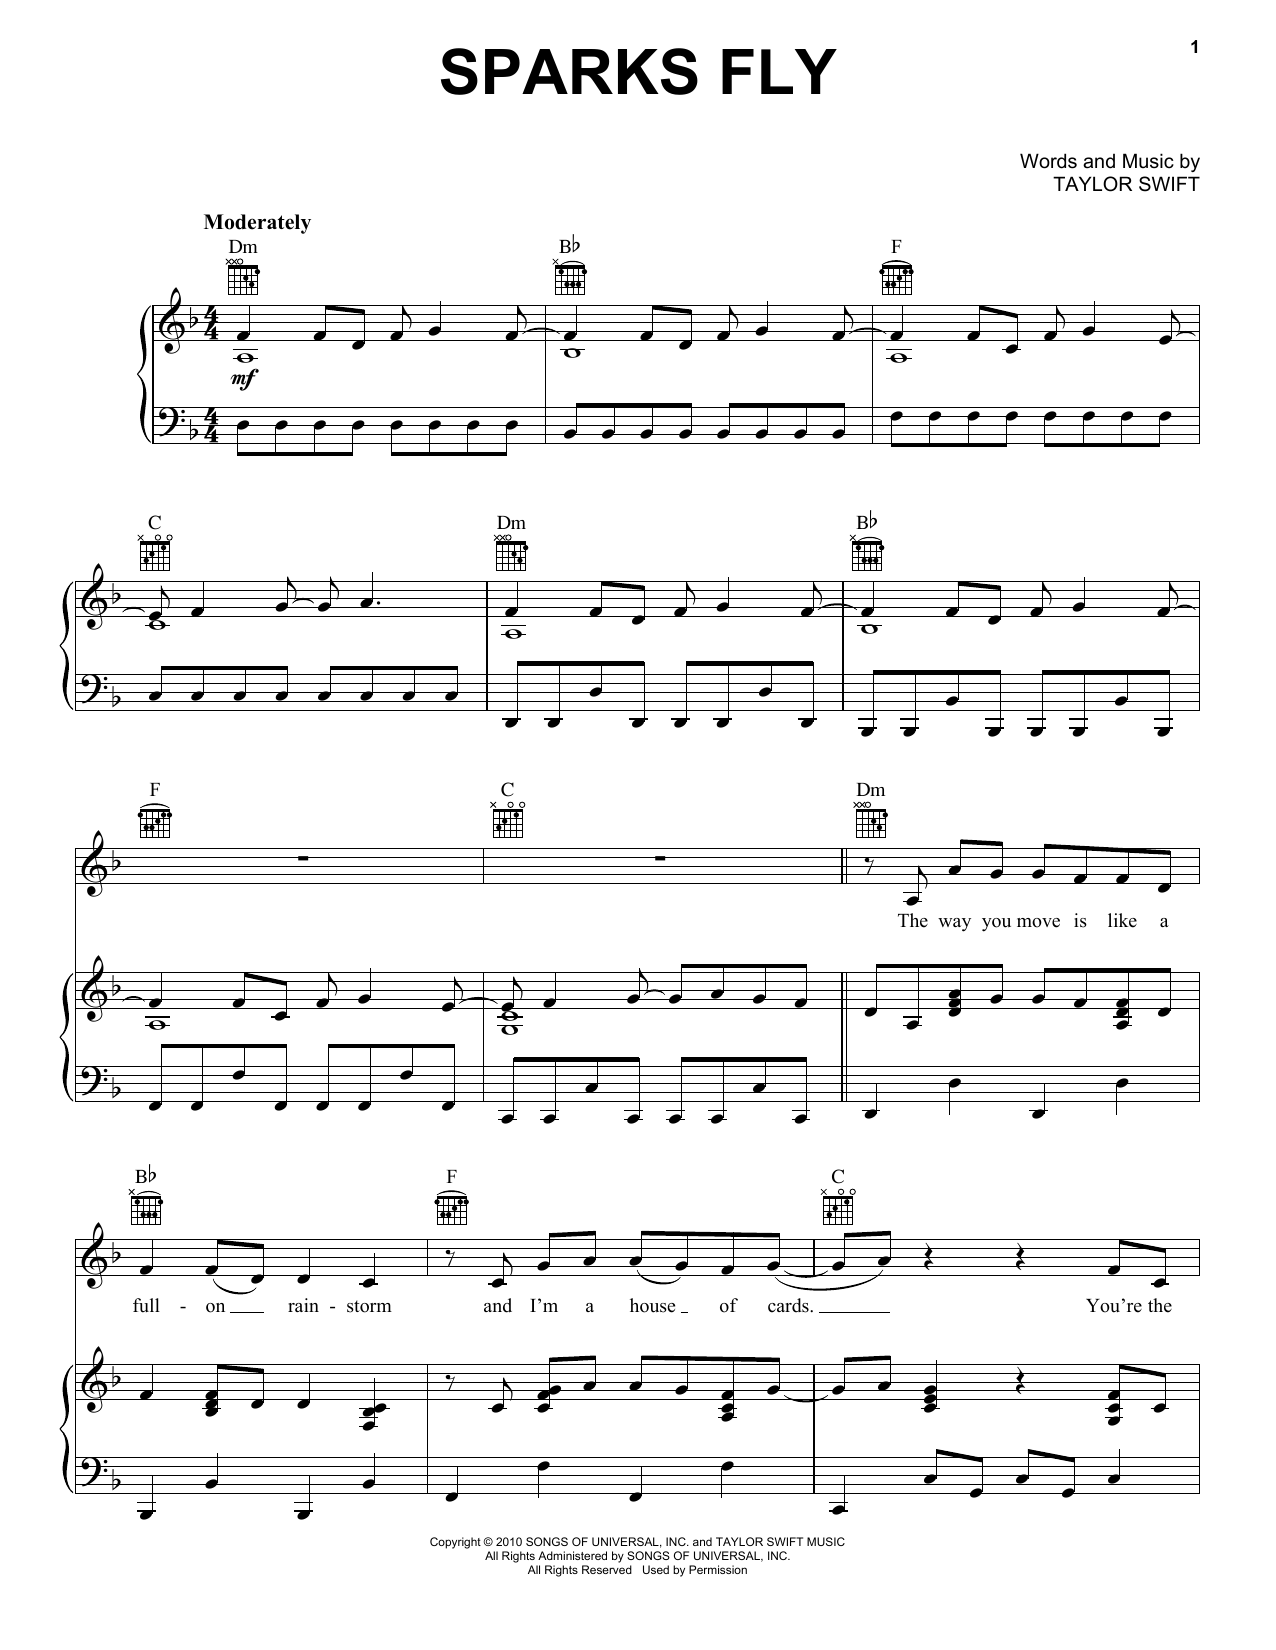 Taylor Swift Sparks Fly sheet music preview music notes and score for Piano including 7 page(s)